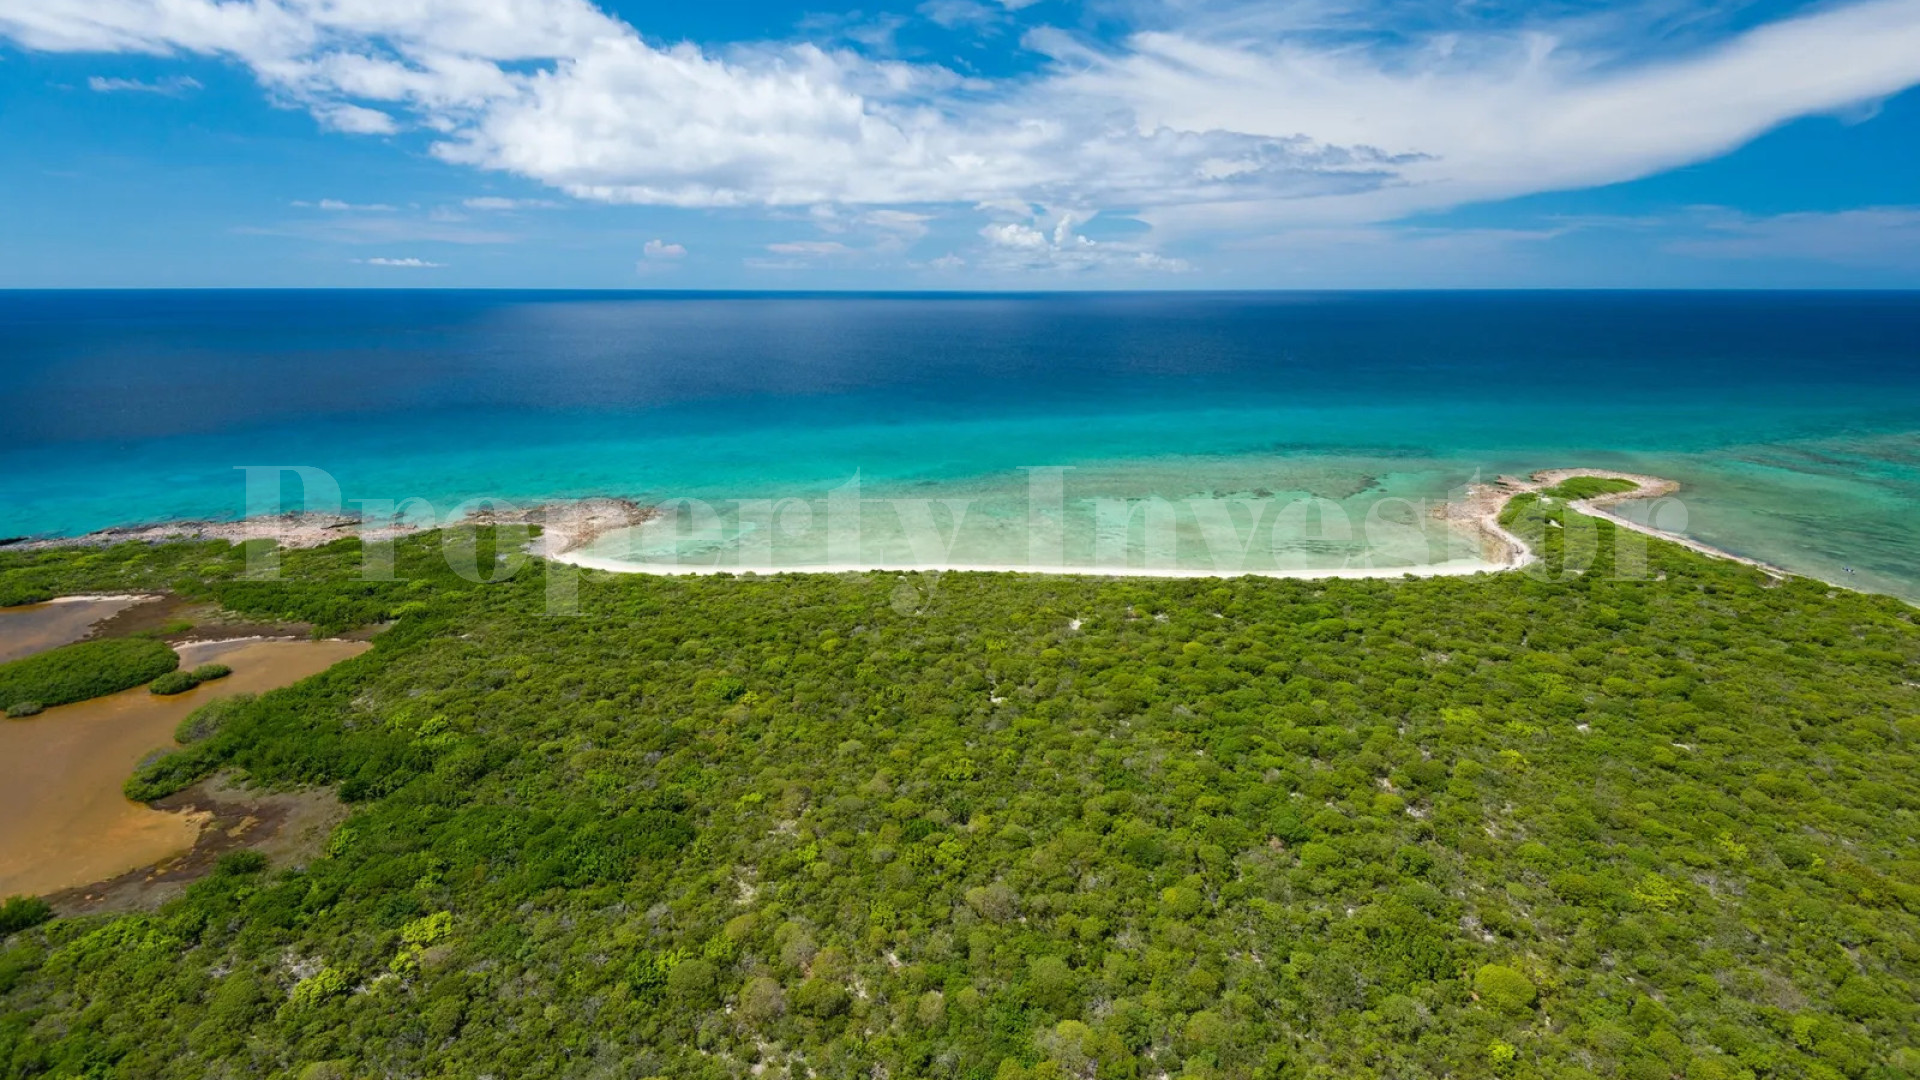 Secluded 5.64 Hectare Lot for Commercial Development in Northwest Point for Sale in Providenciales, Turks & Caicos